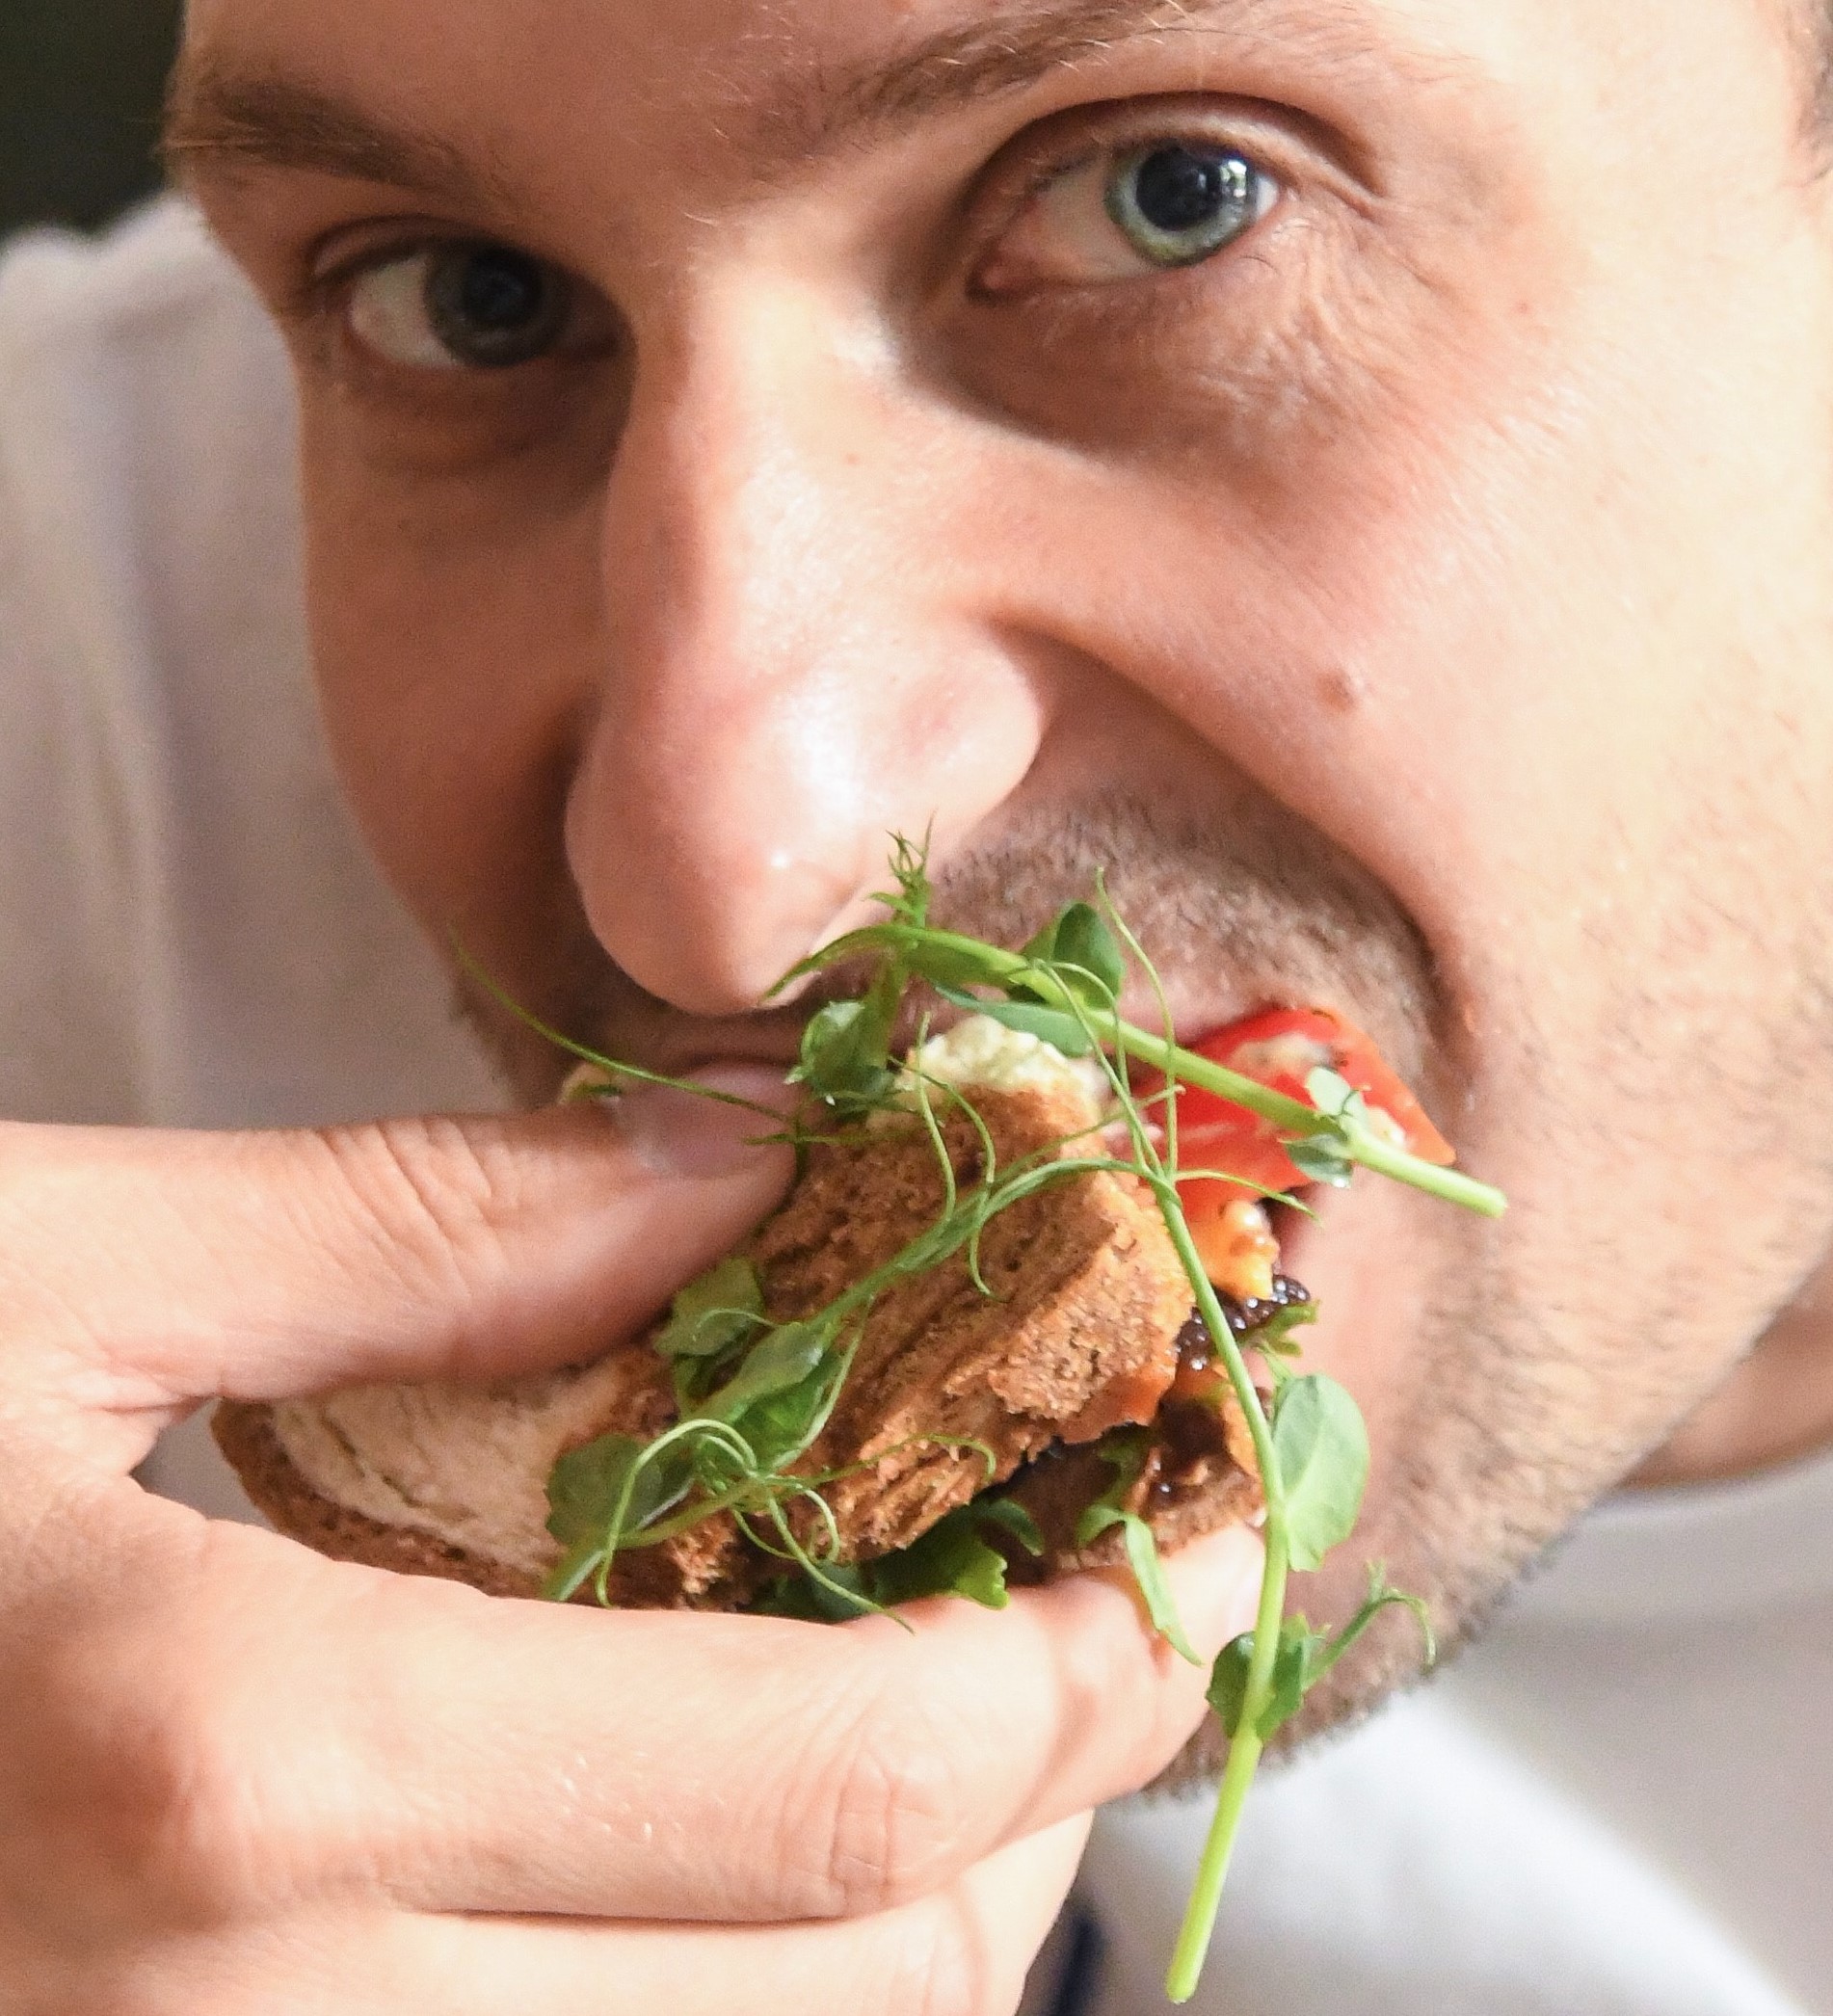 Male athlete eating sandwich, which contains carbohydrates, protein, and fat